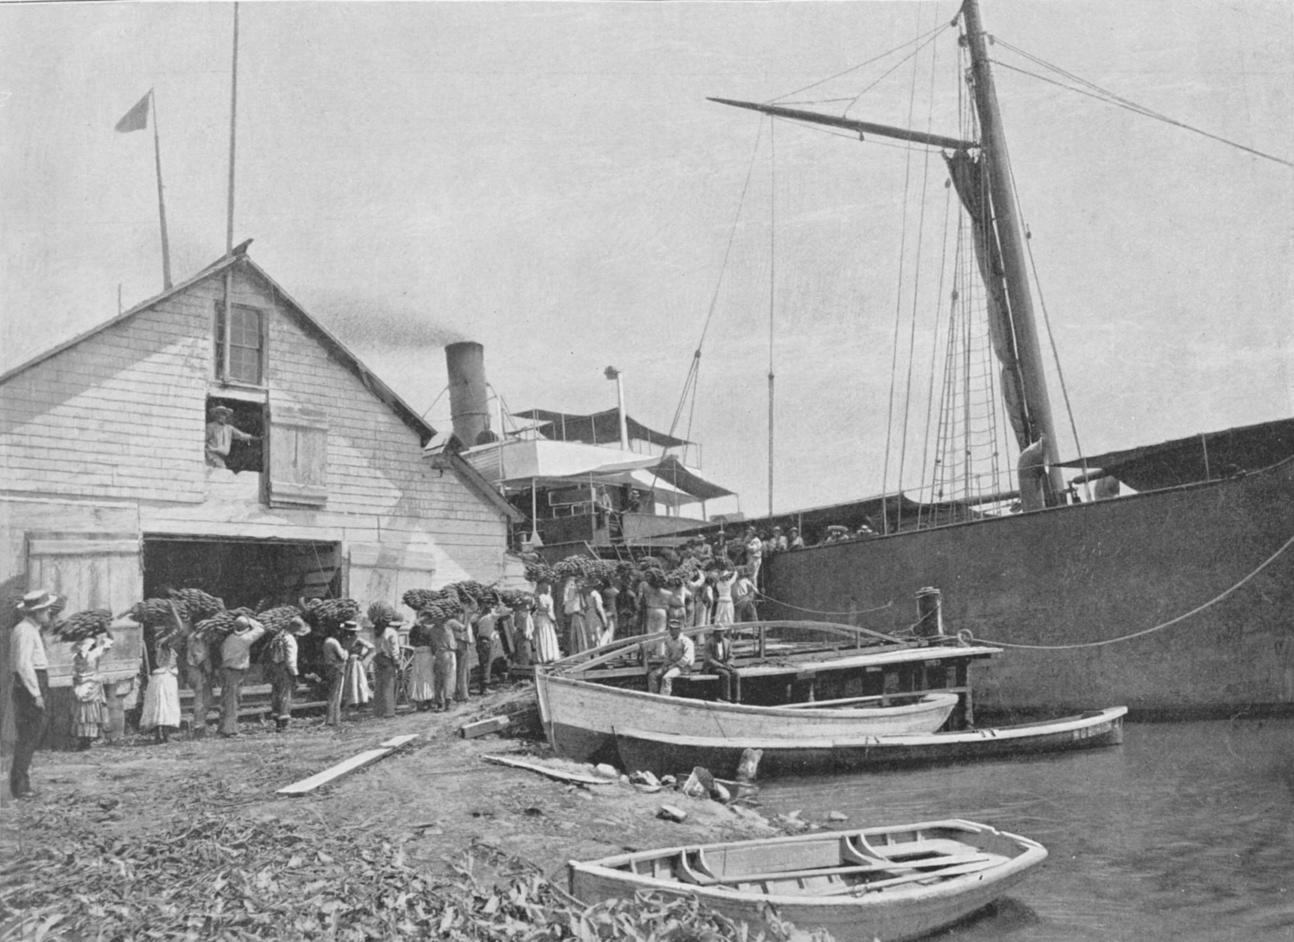 Loading Bananas in Jamaica from the Image Archive on TheGenealogist